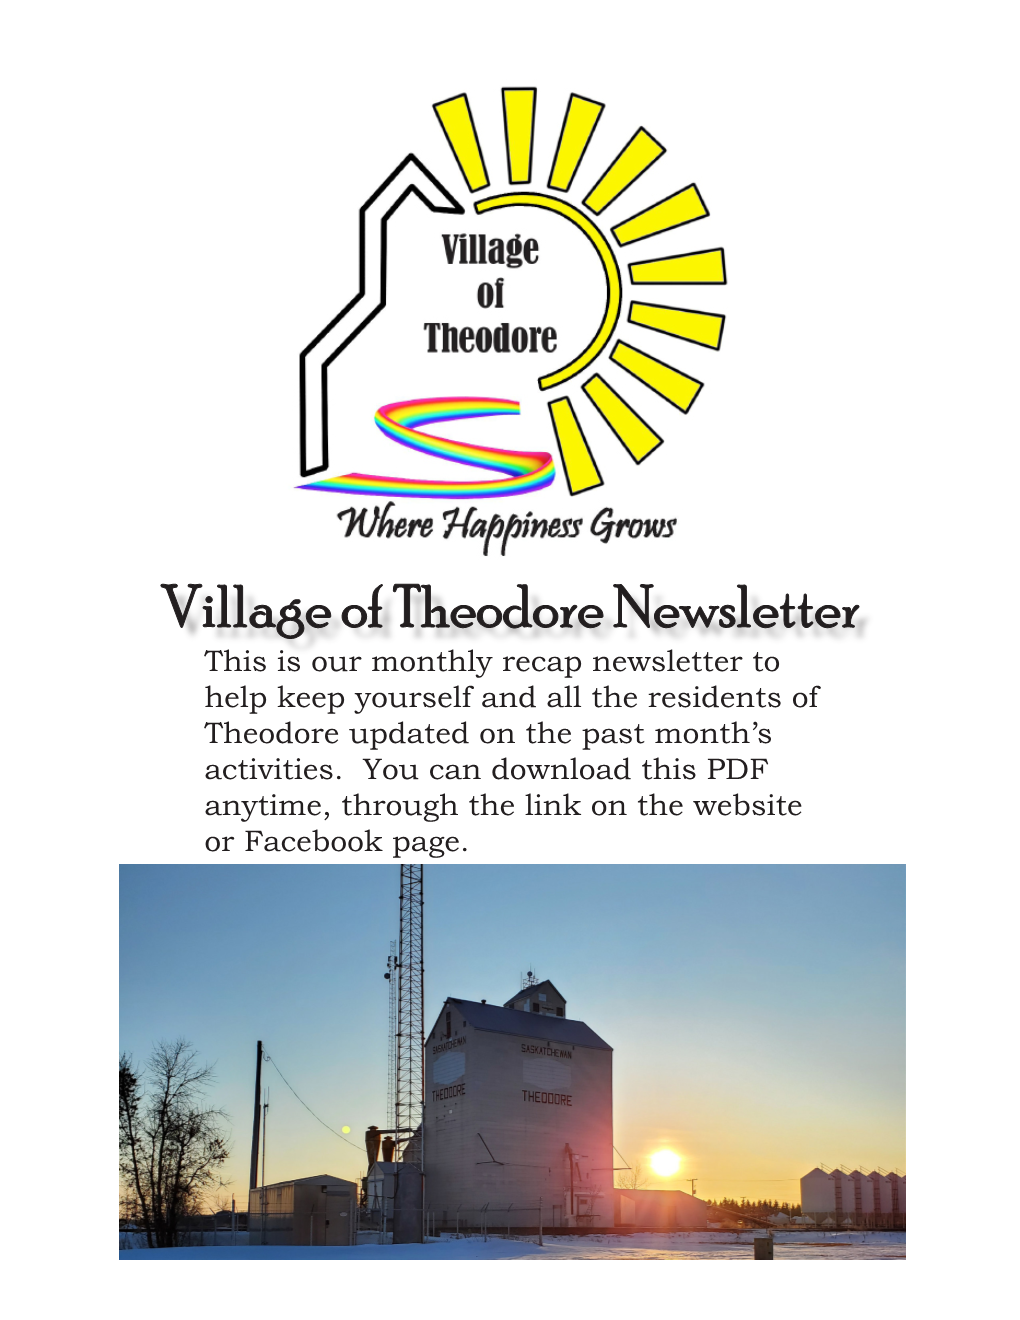 Village of Theodore Newsletter This Is Our Monthly Recap Newsletter to Help Keep Yourself and All the Residents of Theodore Updated on the Past Month’S Activities